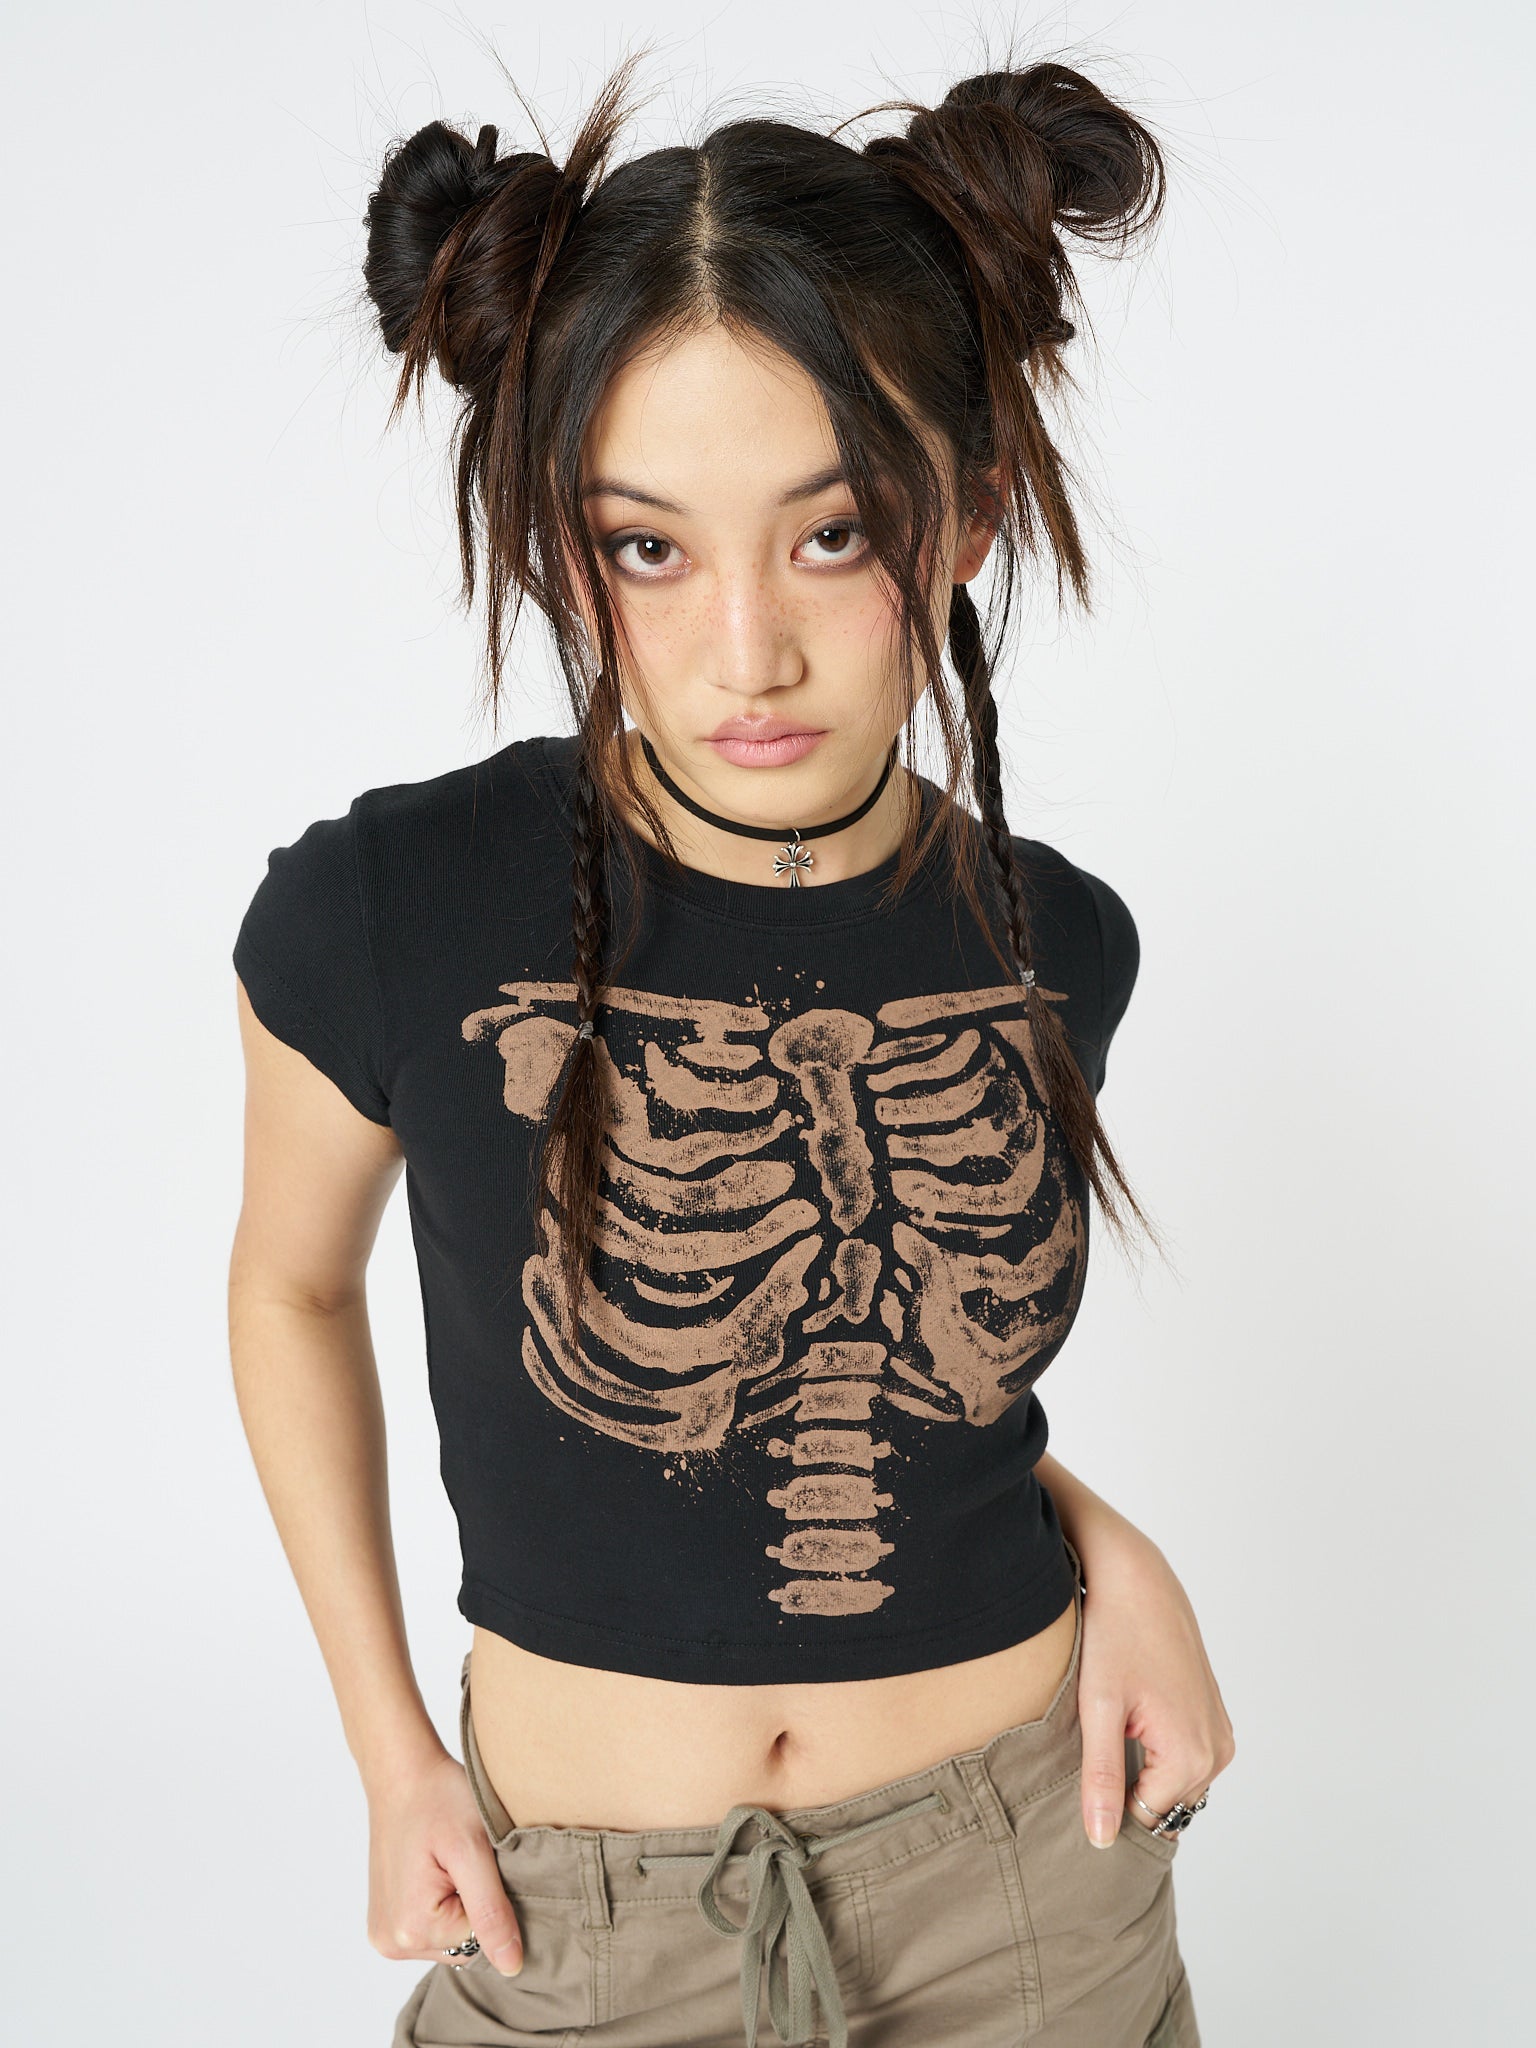 Embrace your edgy side with the Skeleton Black Graphic Print Baby Tee. This trendy baby tee features a striking skeleton graphic print, adding a cool and mysterious vibe to your outfit. Perfect for adding a touch of alternative style to your look.